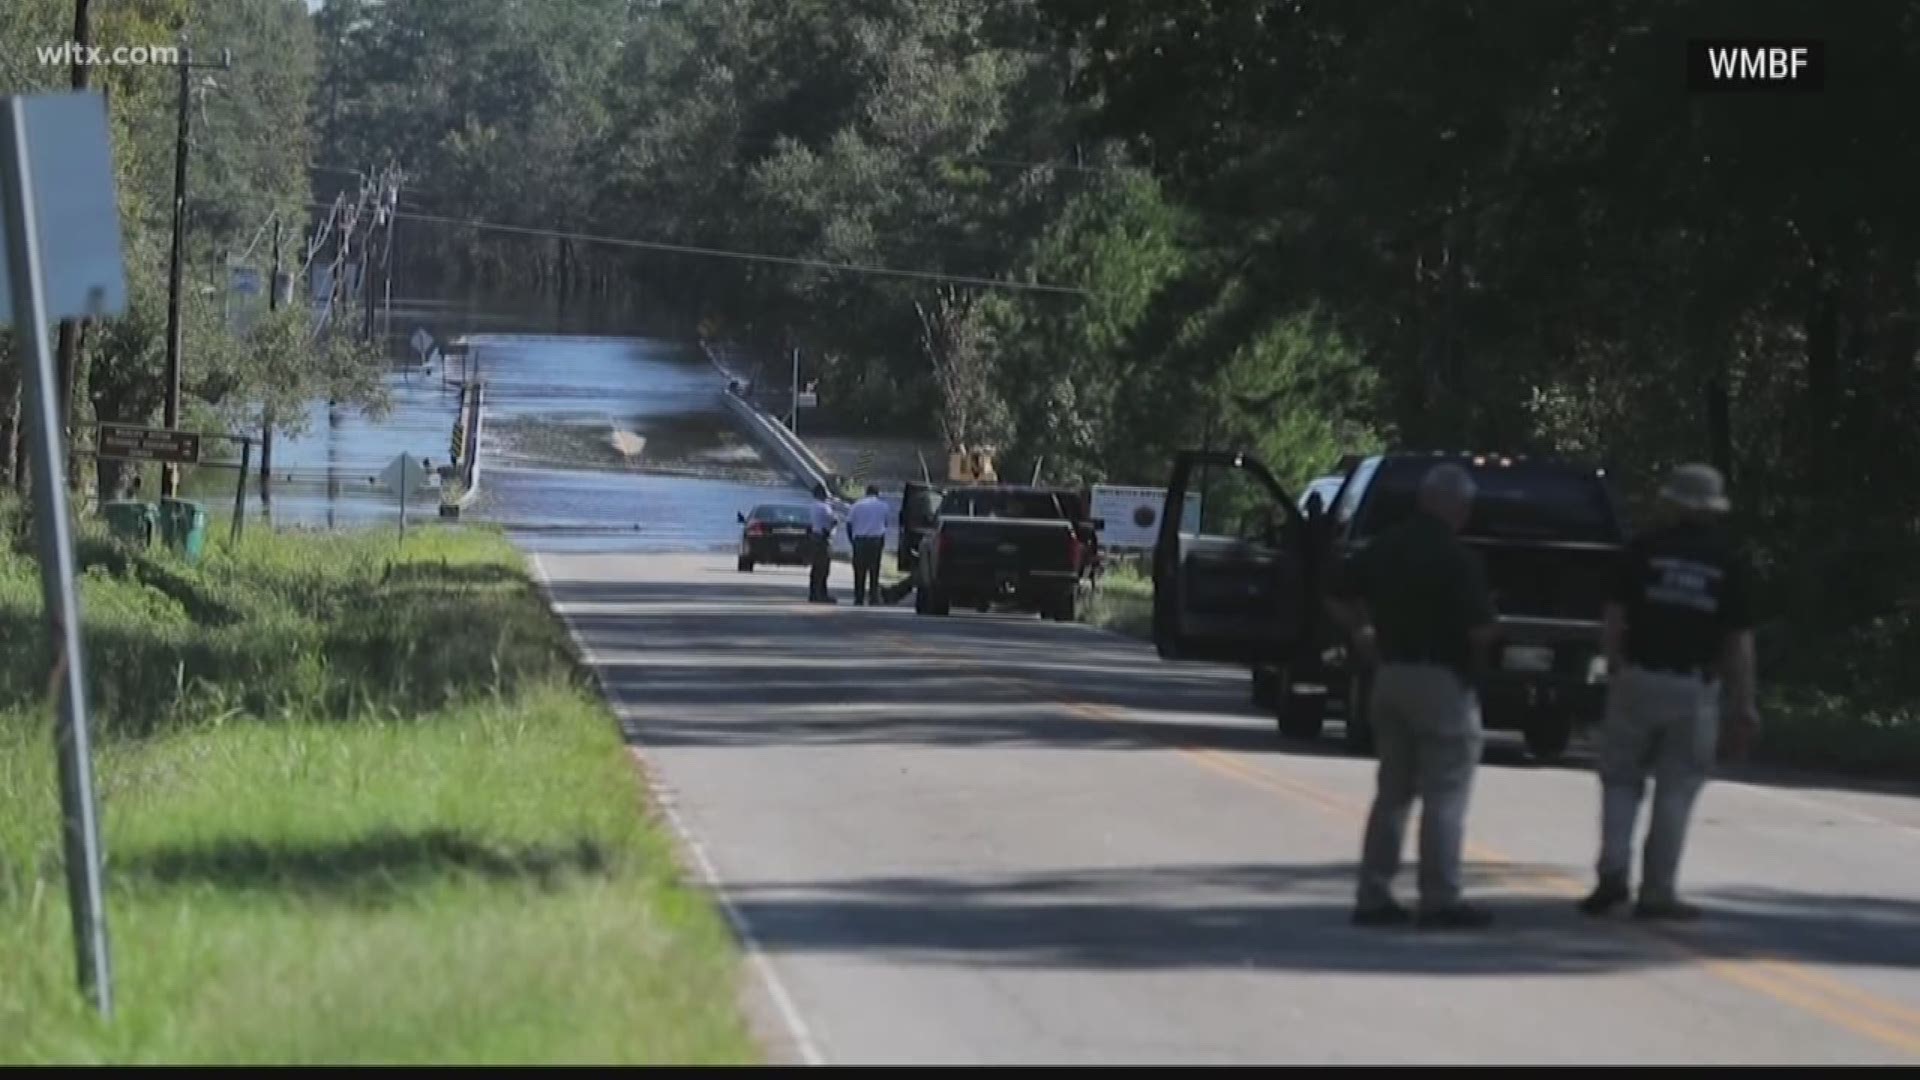 The Horry County Sheriff's Department is investigating what decisions caused the death of two women in floodwater.